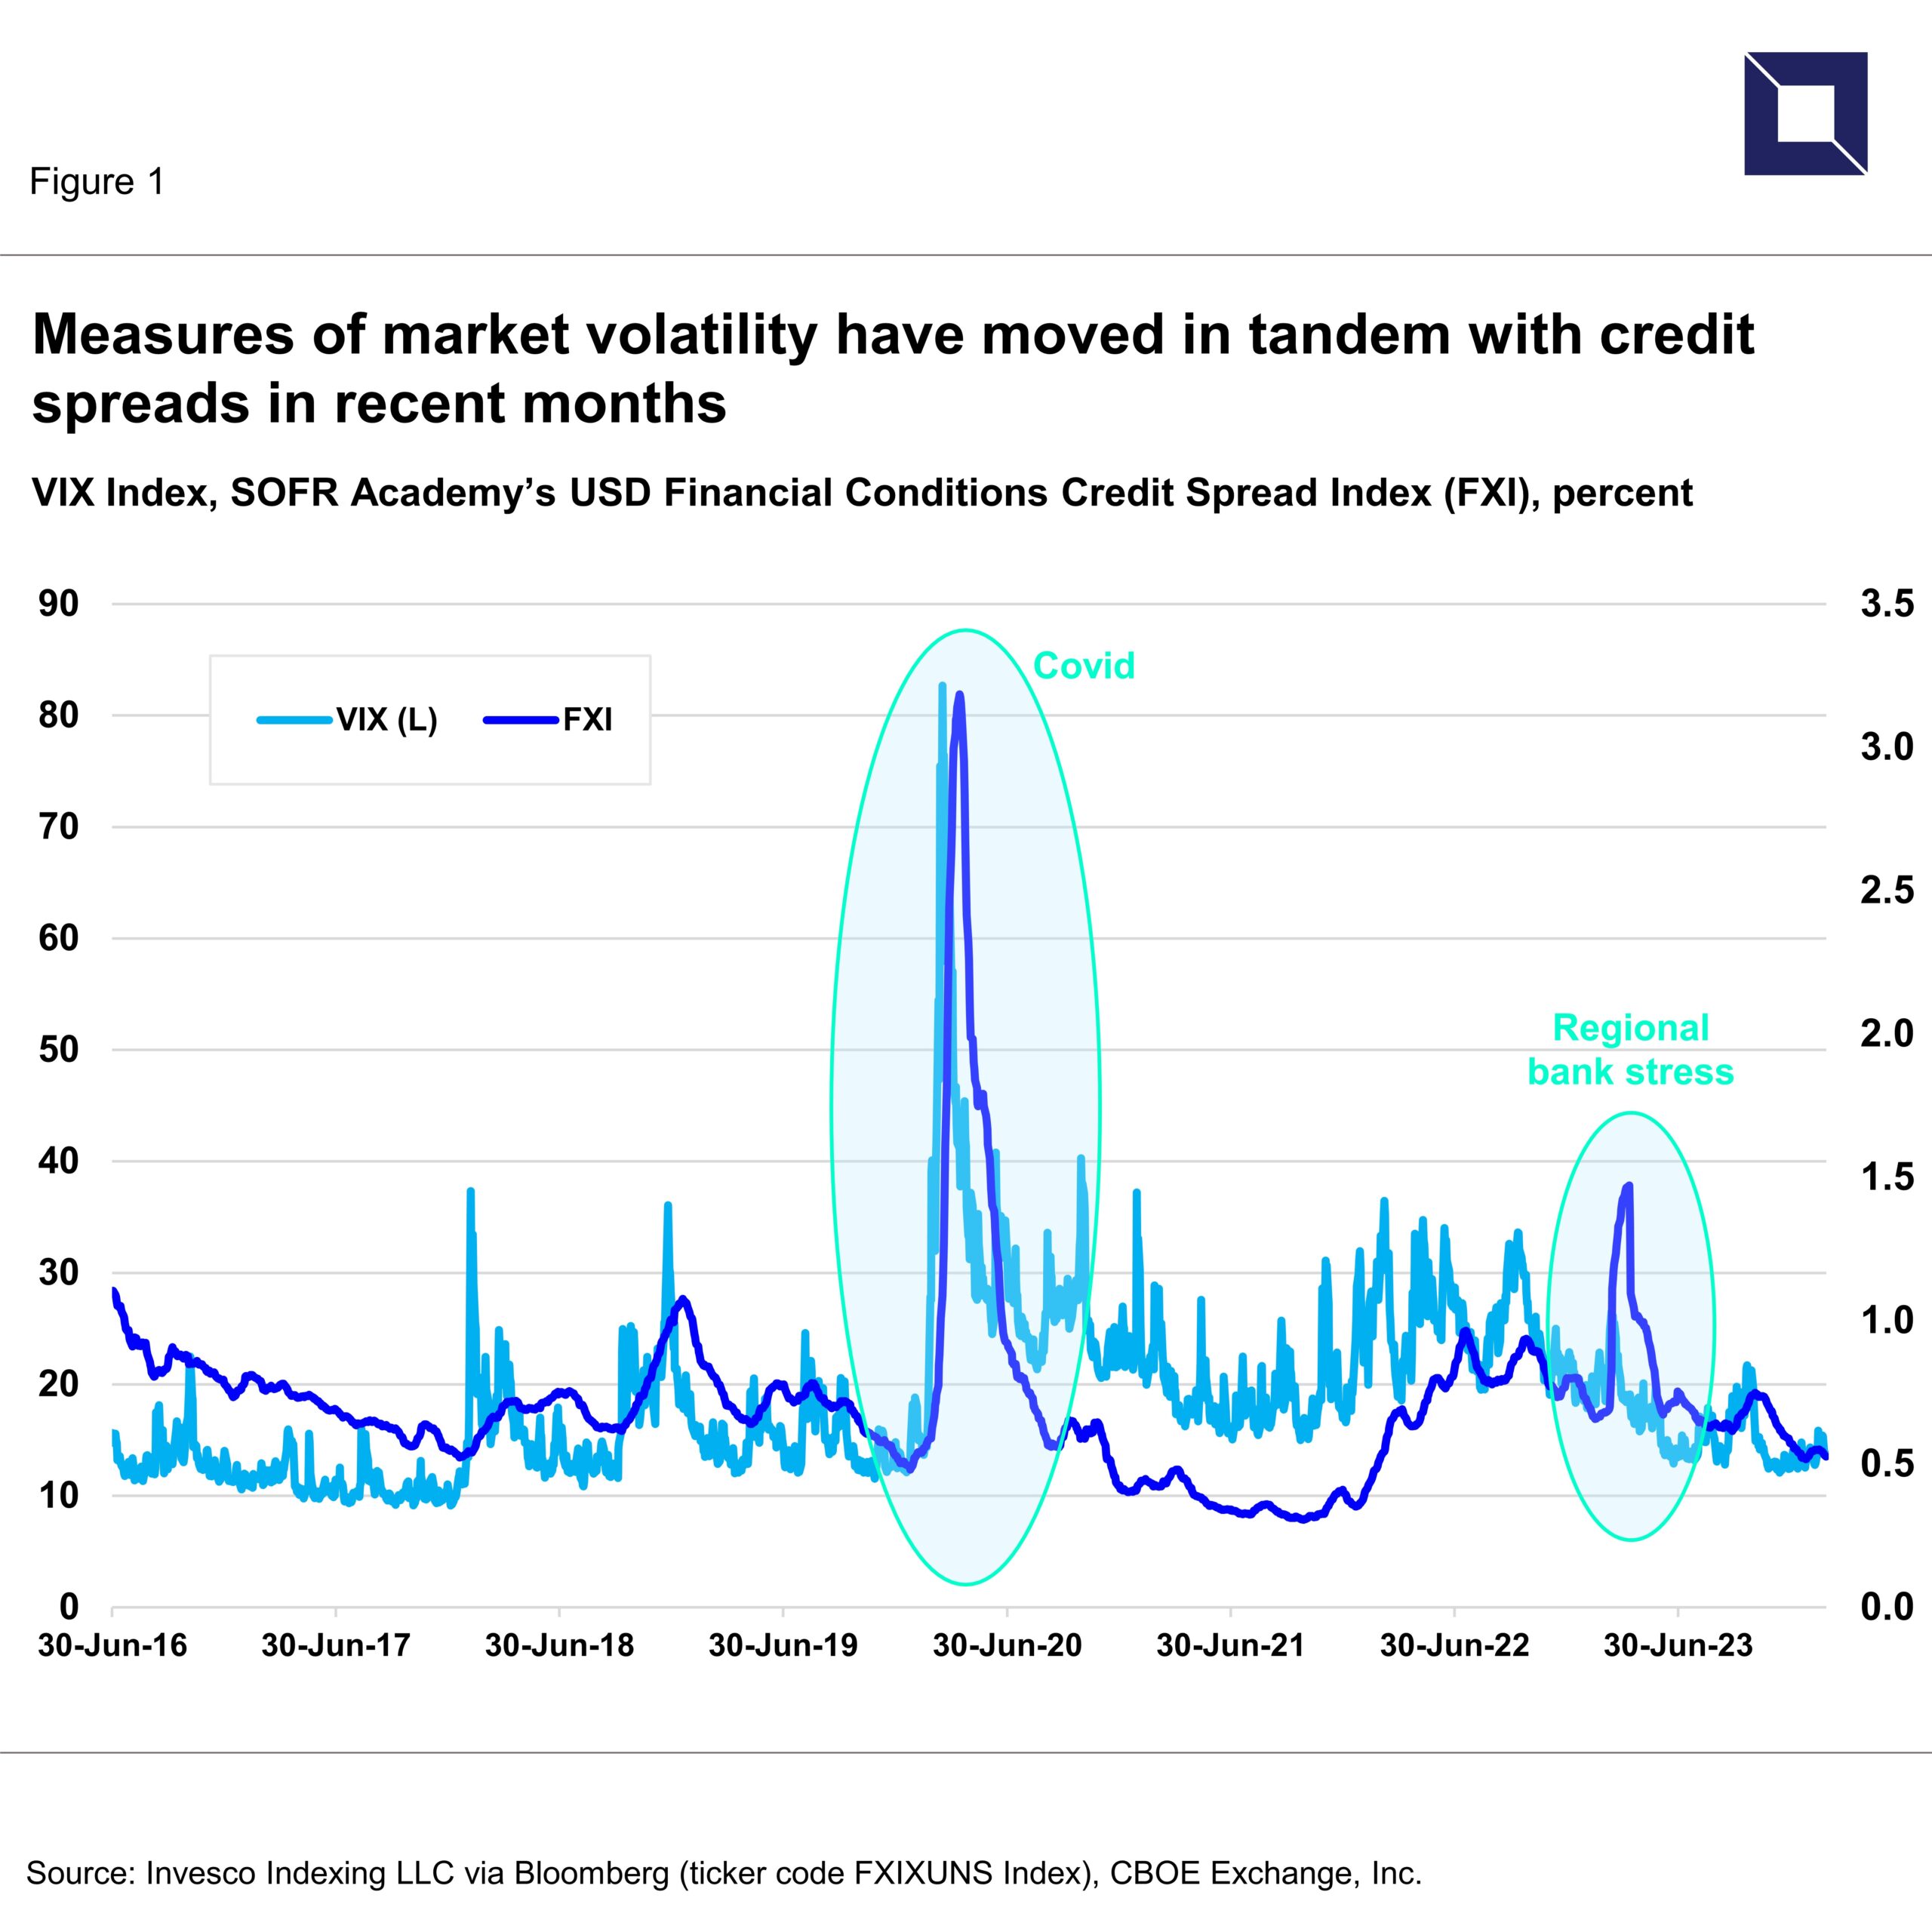 Measures of market volatility have moved in tandem with credit spreads in recent months - SOFR Academy